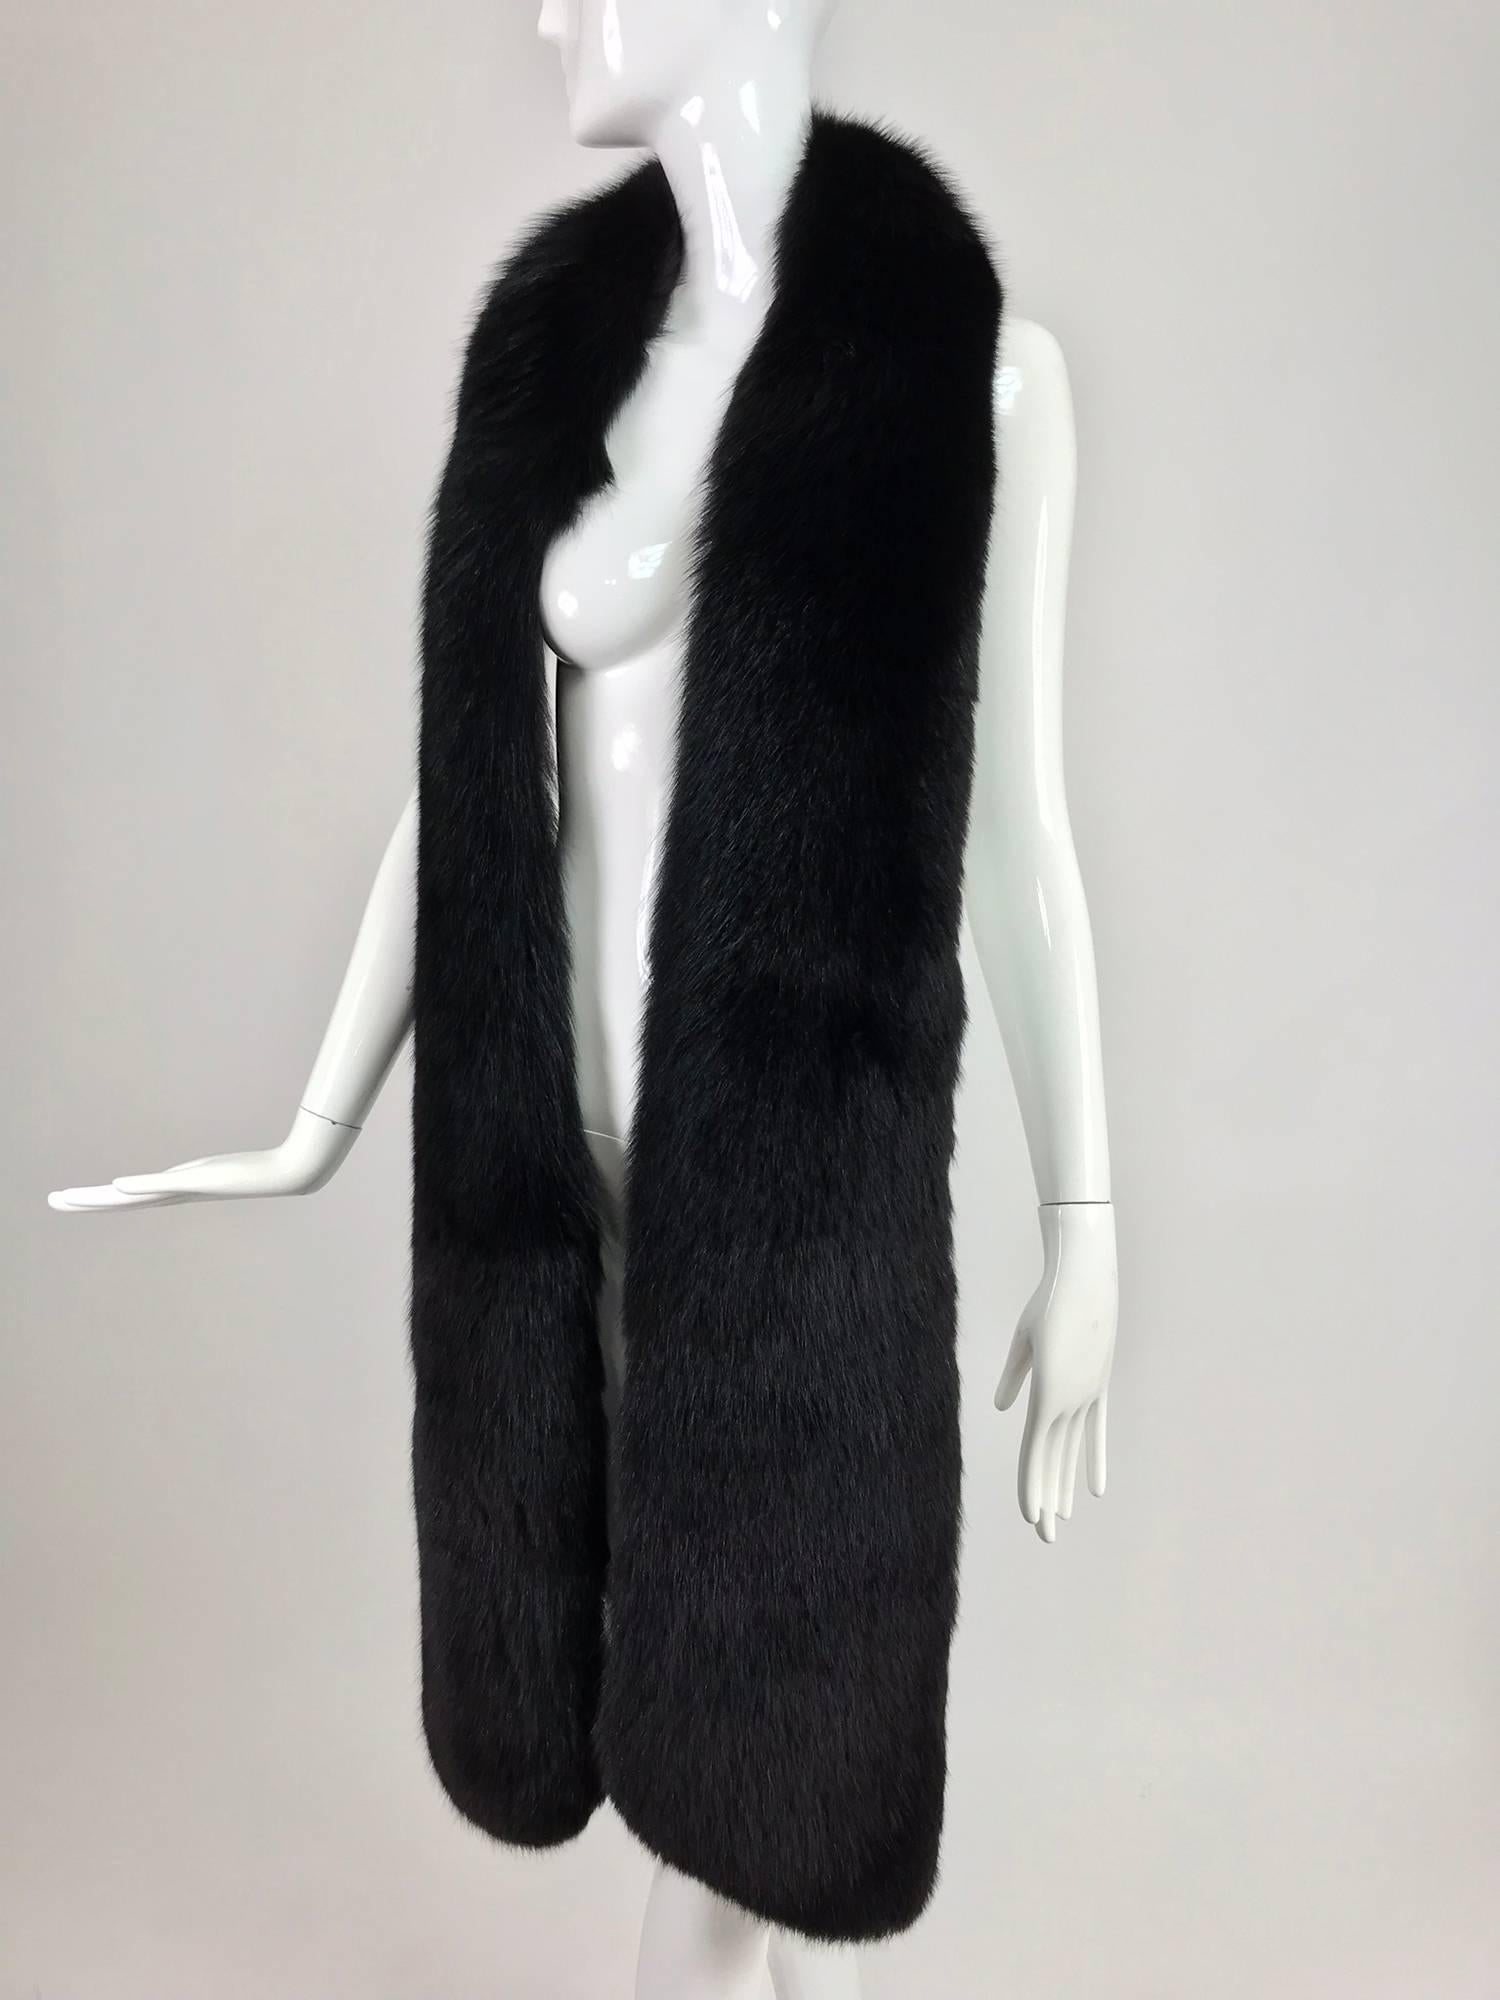 Black fox fur long stole from the 1960s...Full and soft black fox fur long stole perfect for wearing over a coat...Fully lined in velvet...

In excellent wearable condition... All our clothing is dry cleaned and inspected for condition and is ready